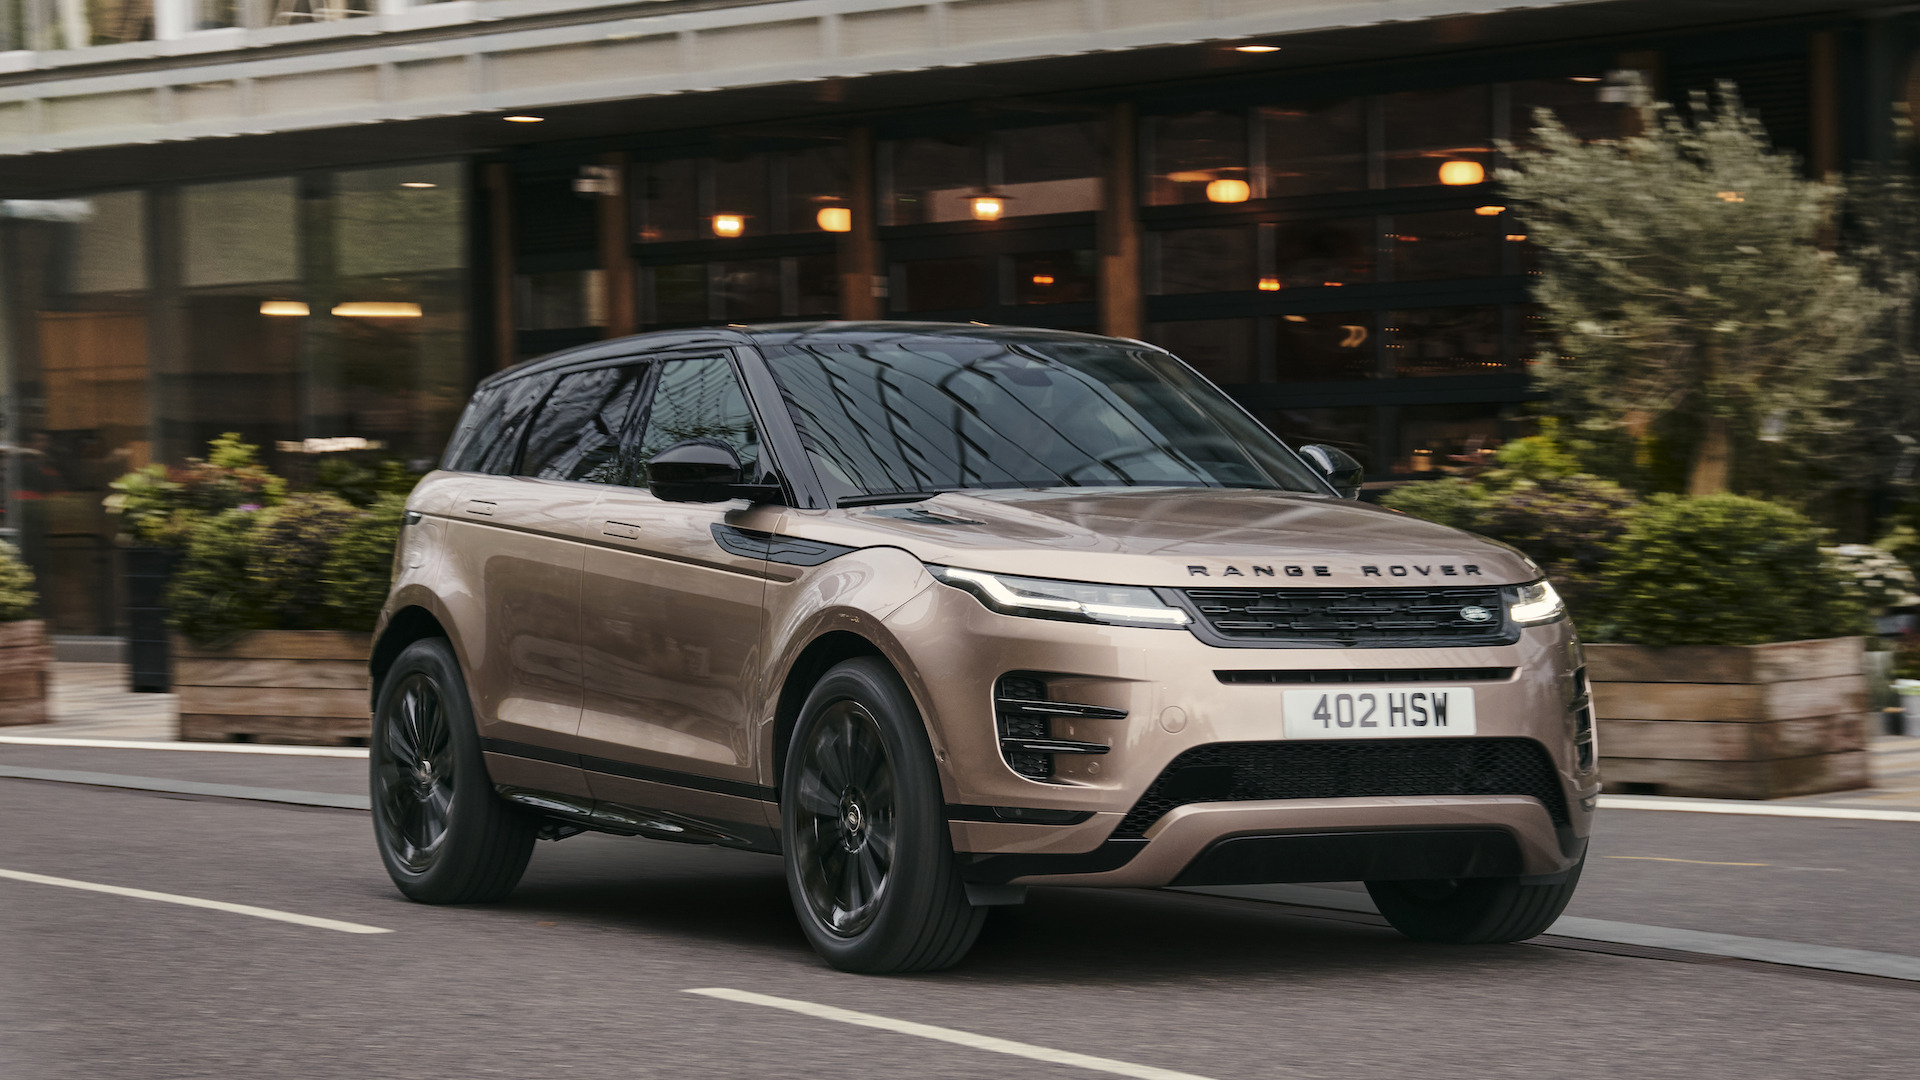 Range Rover Evoque Colours Free & Paid Options Carwow